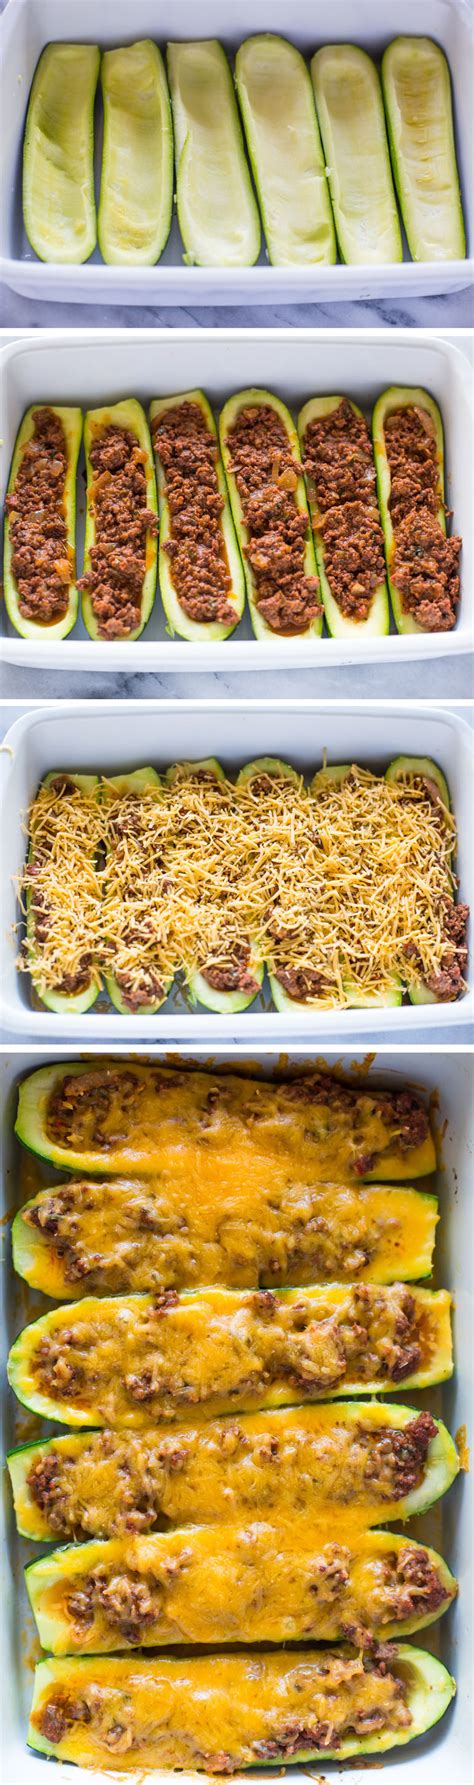 We love zucchini boats, i originally got the inspiration for this dish from these sausage stuffed zucchini boats, another stuffed. Beef Stuffed Zucchini Boats | Gimme Delicious